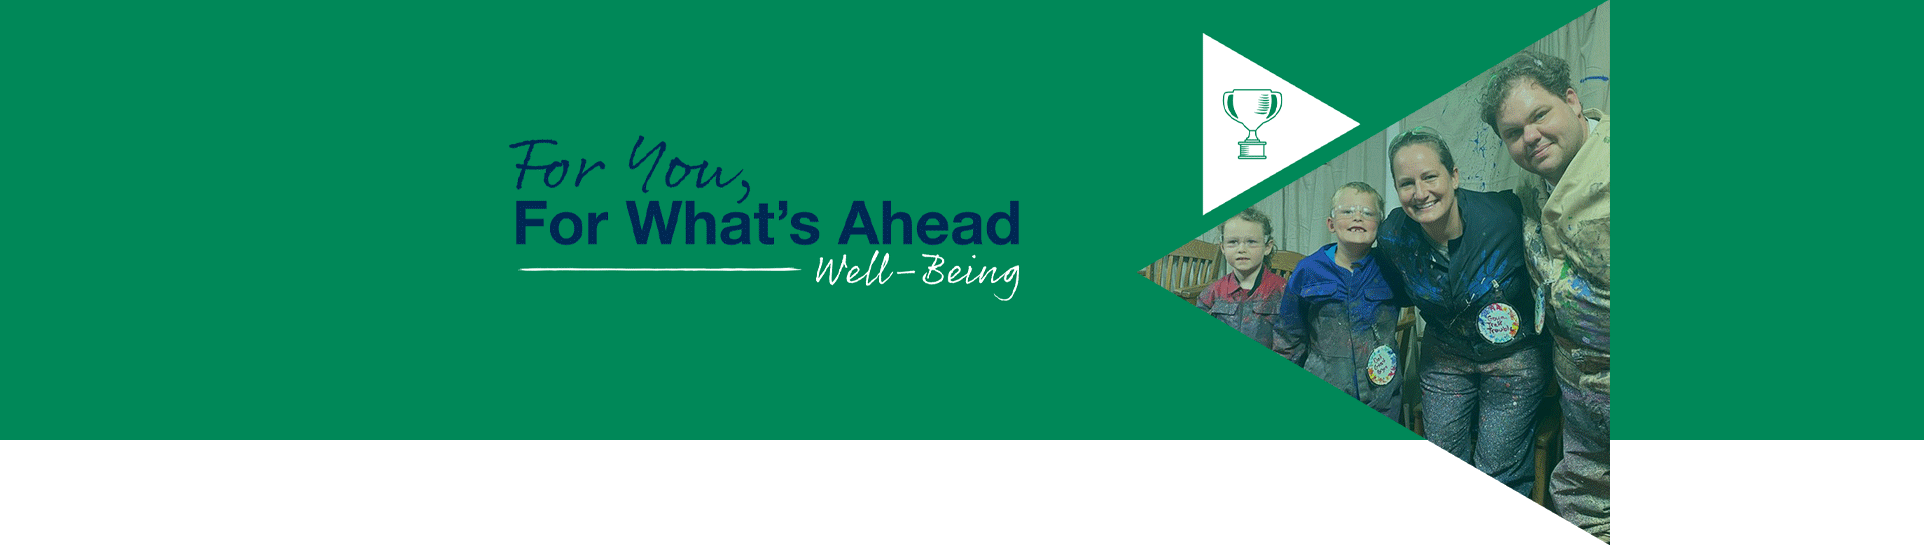 For You, For What's Ahead: Well-Being